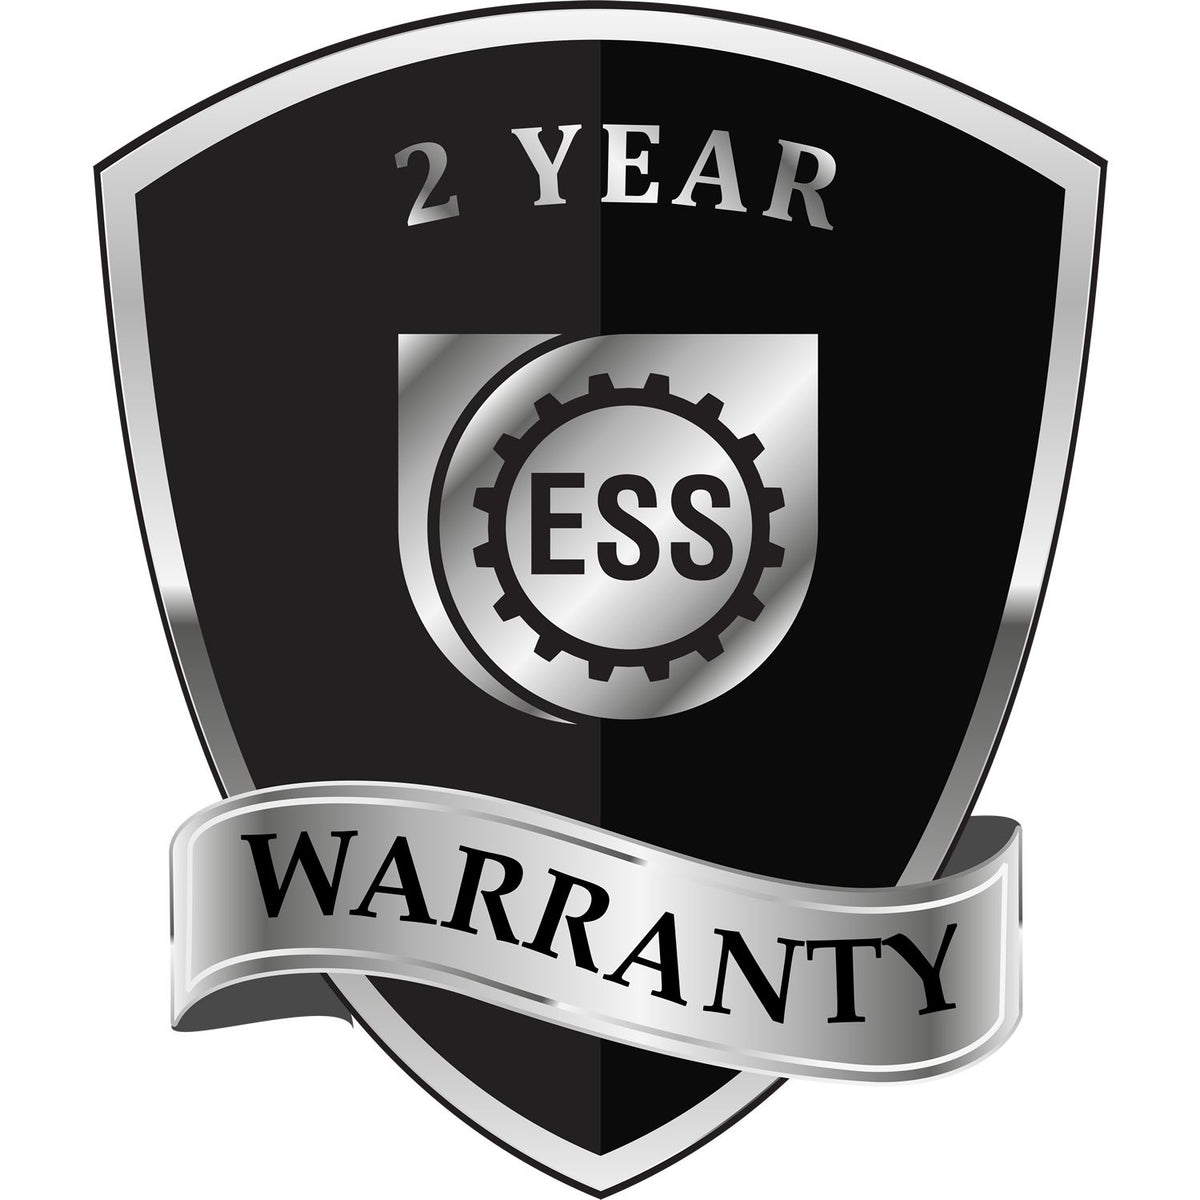 A badge or emblem showing a warranty icon for the Handheld Iowa Professional Engineer Embosser